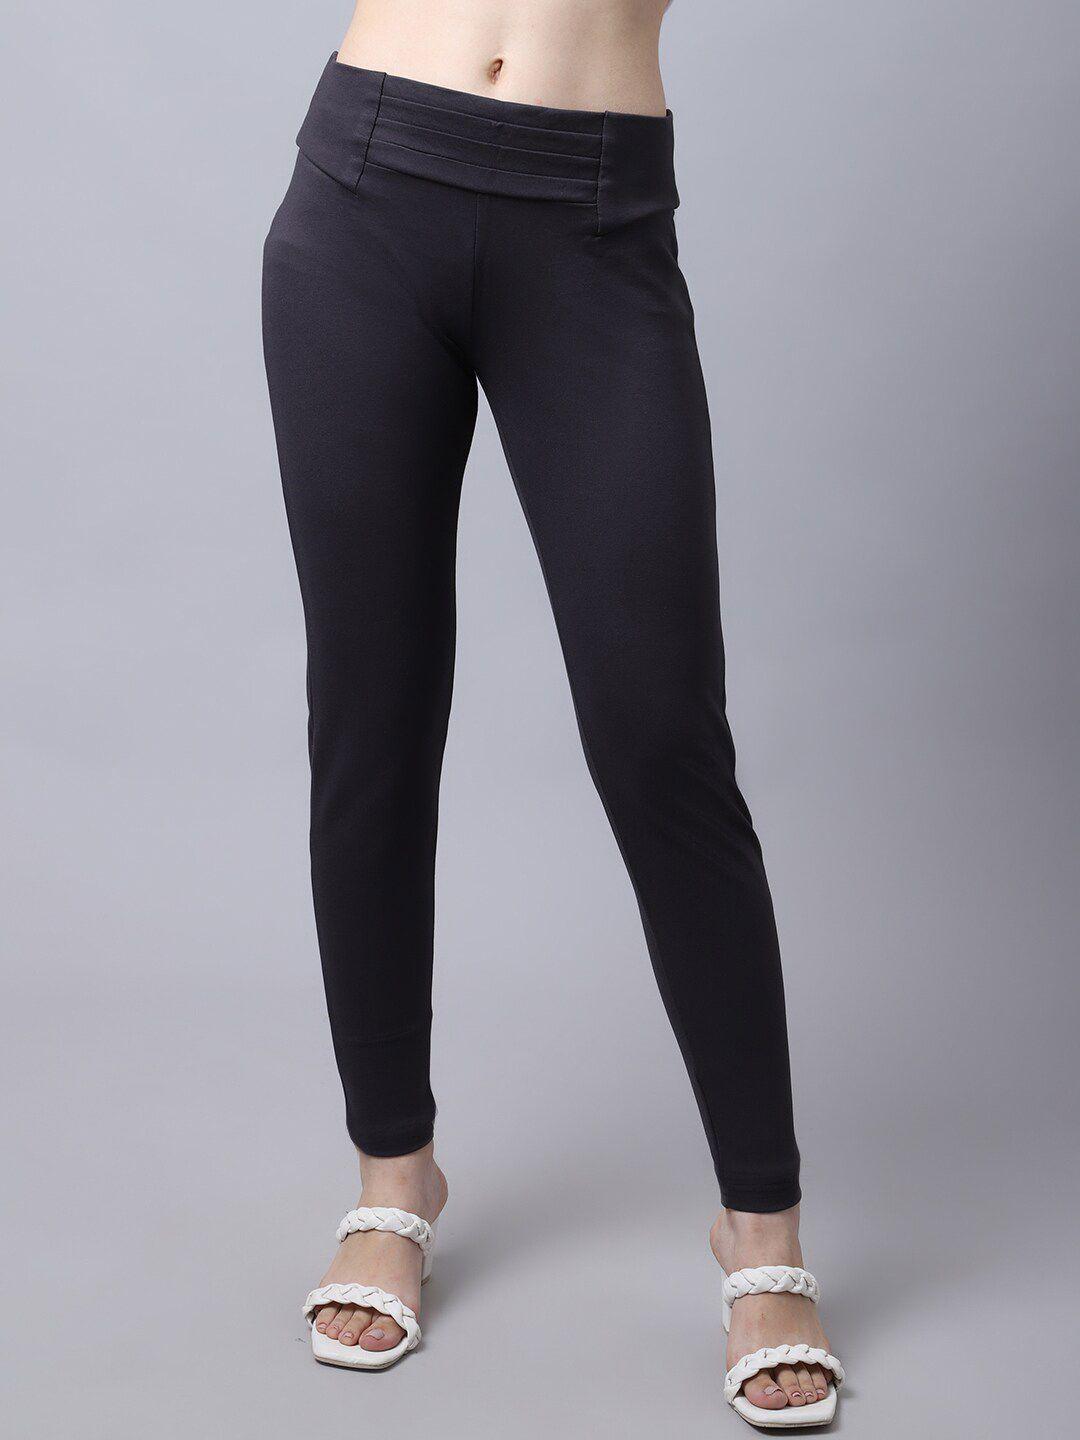 cantabil-women-charcoal-solid-cotton-jeggings